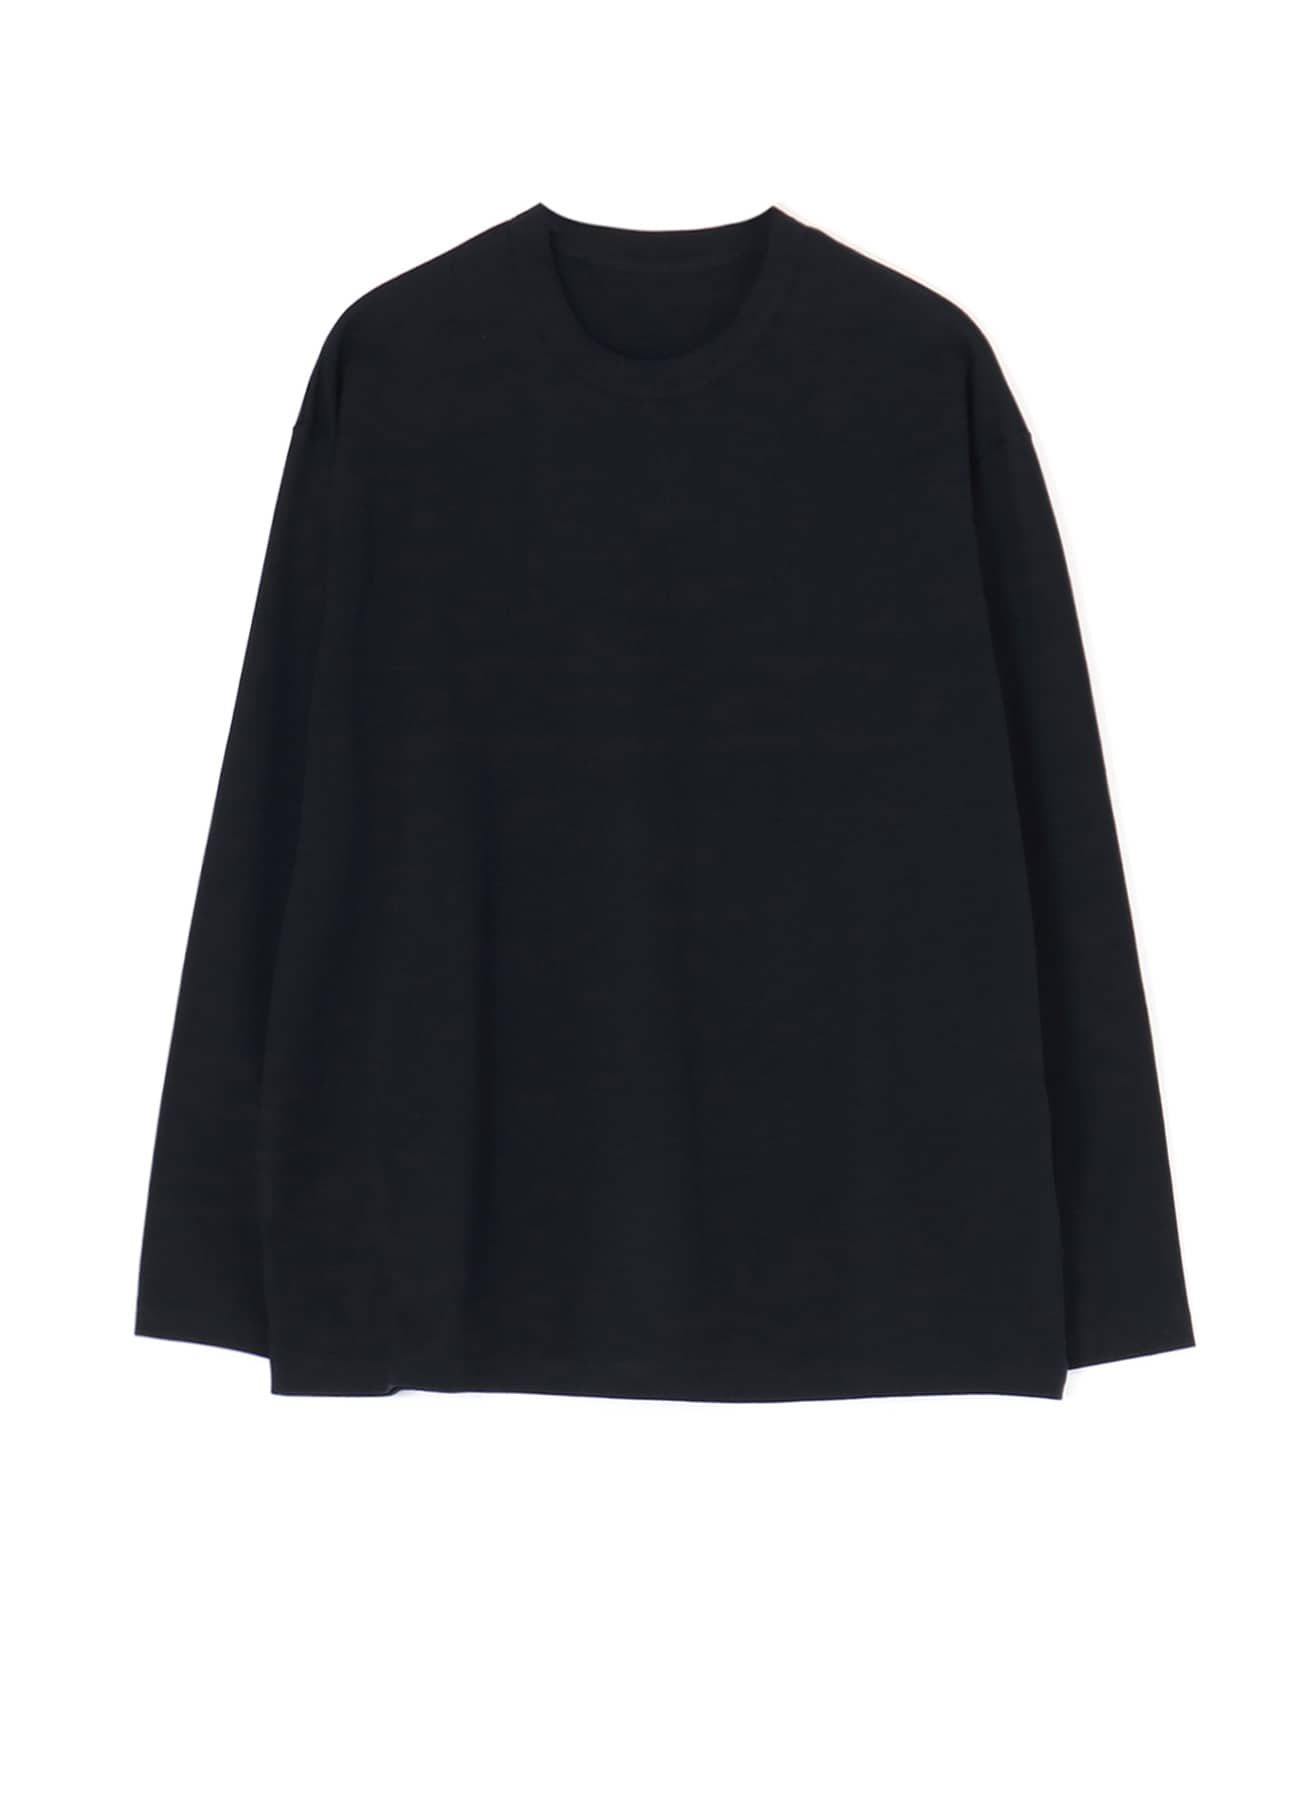 40/2 COTTON JERSEY LONG SLEEVE SHIRT (L)(L Black): Y's for 